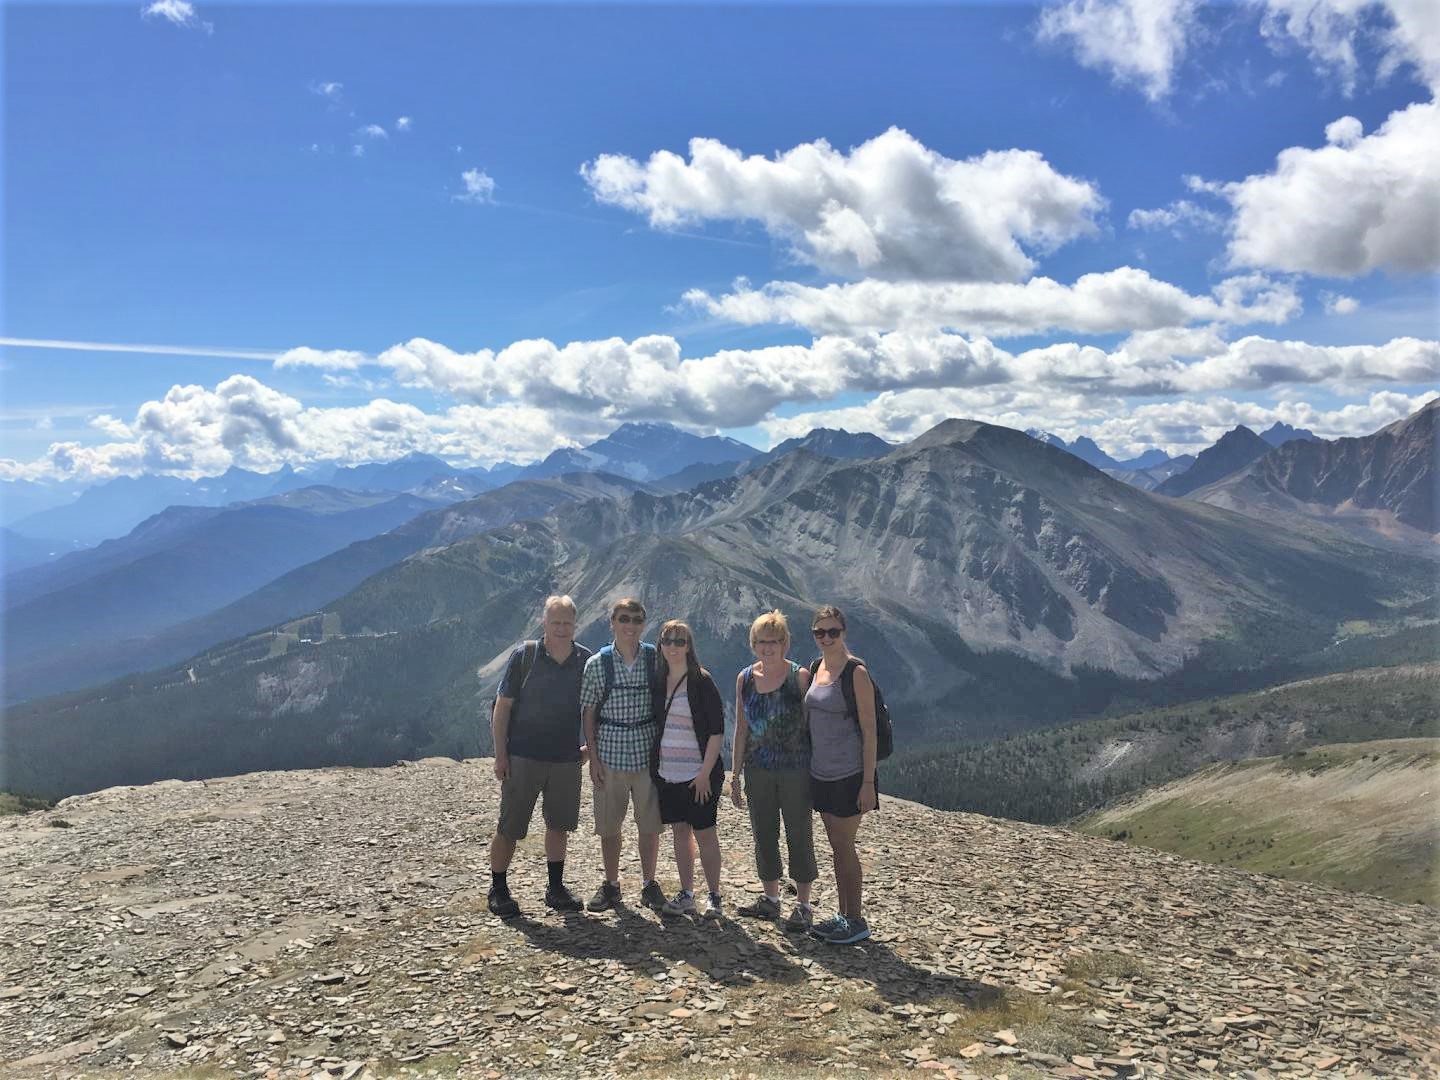 a group of five people (white) standing at the top of the Jasper Skyline mountain area with mountains in the background.